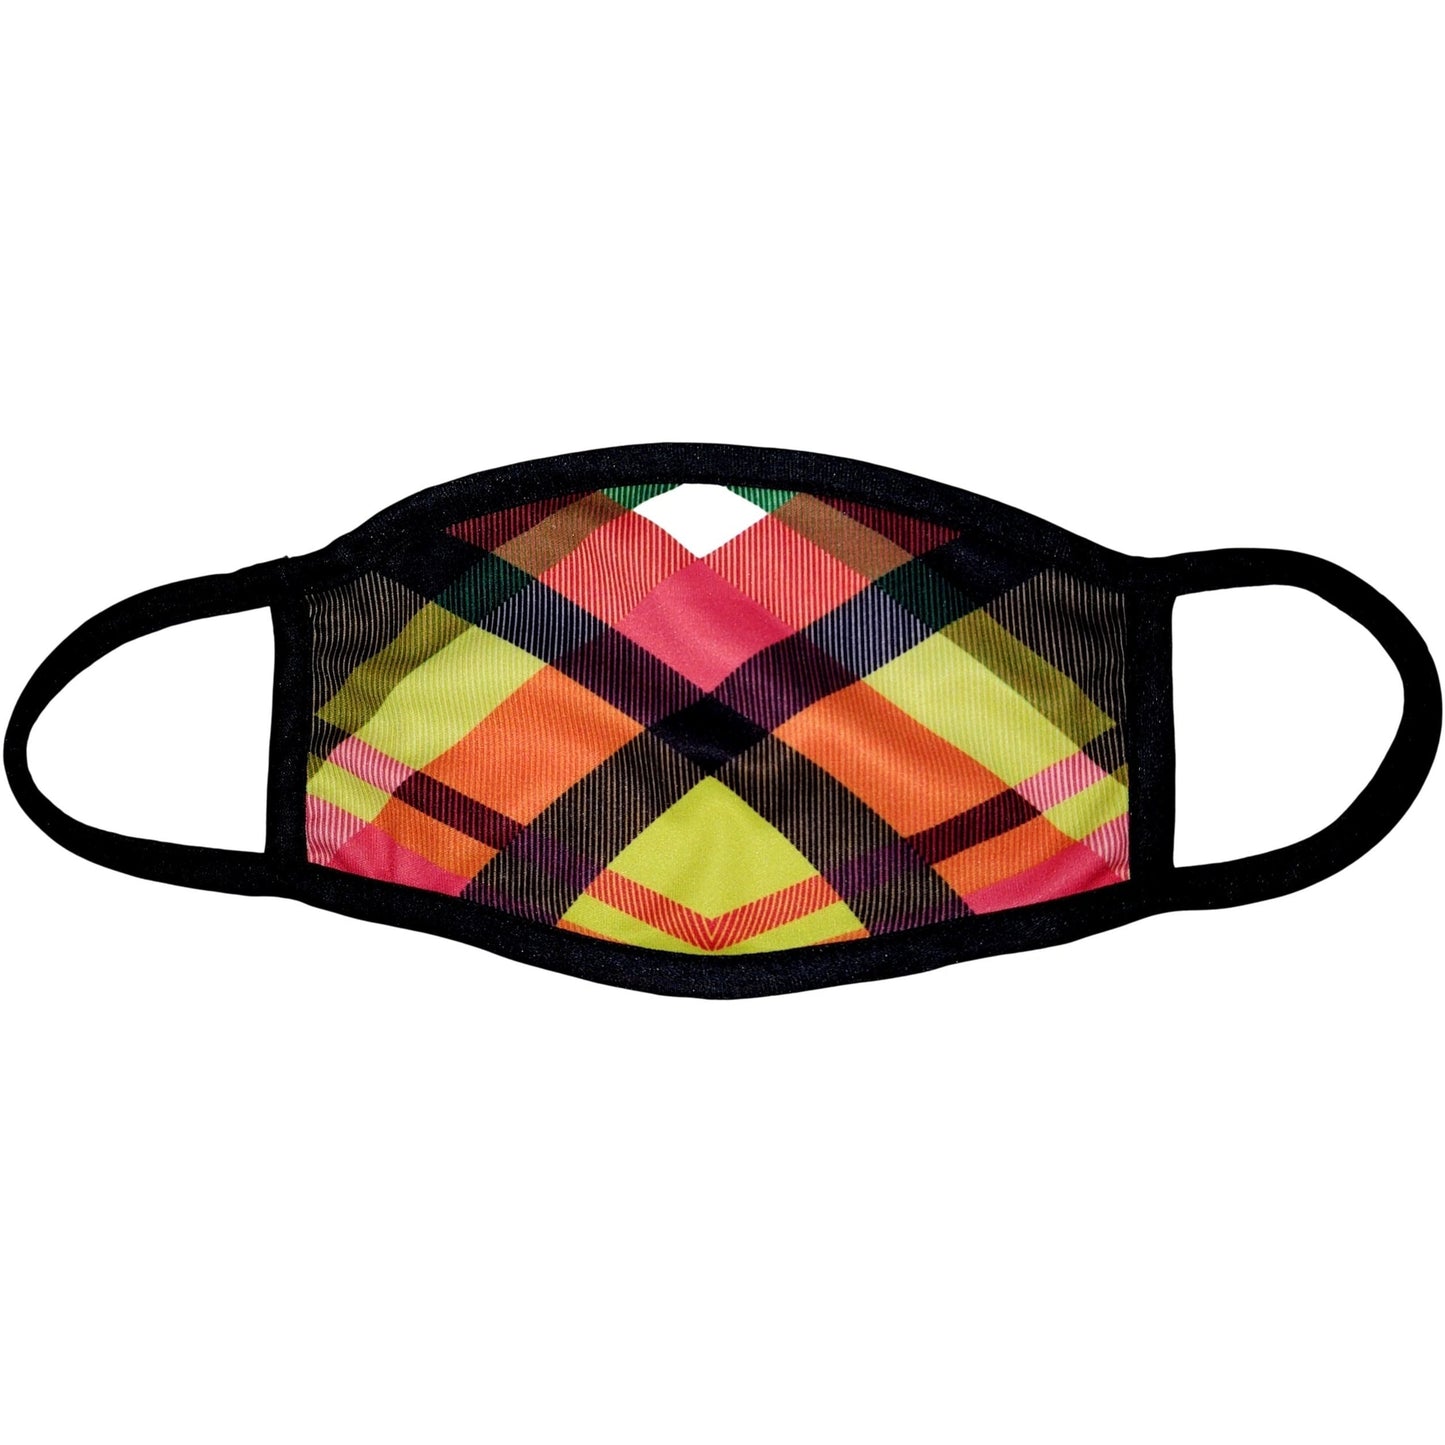 Vibrant Plaid Design Fashion Mask with PM2.5 Filter ~ Washable and Reusable